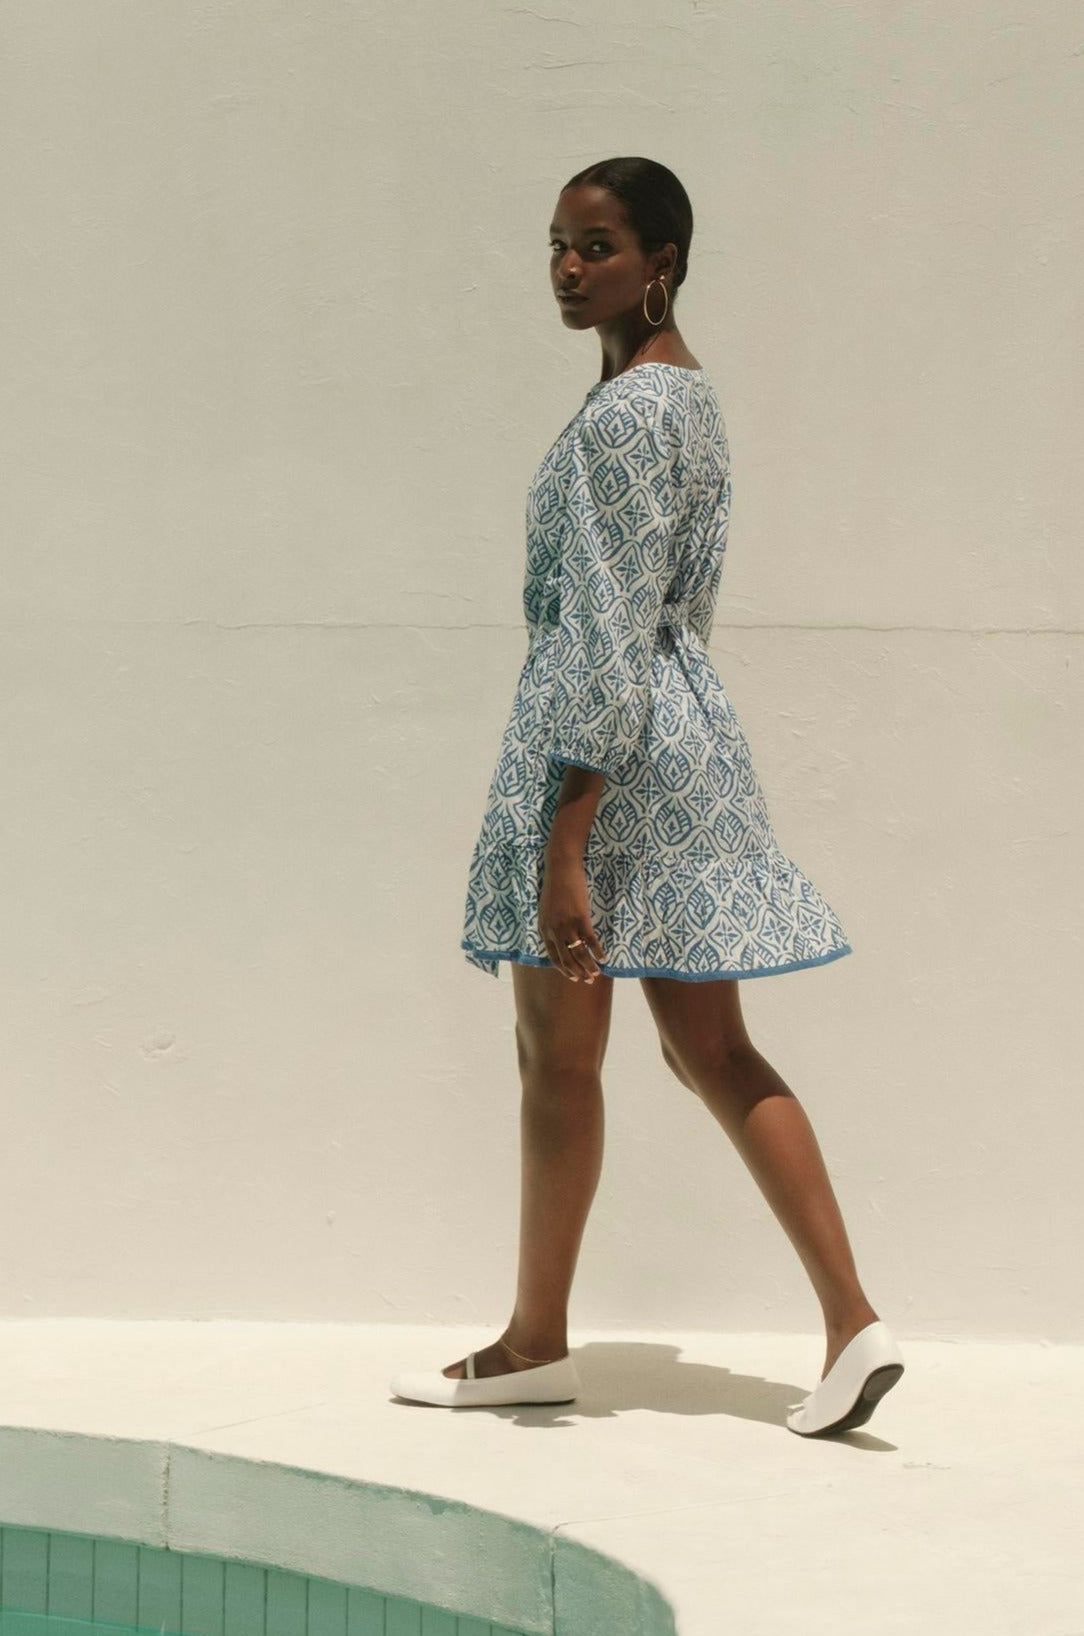 A woman in a KENLEY PRINTED BOHO DRESS by Velvet by Graham & Spencer and white shoes walks past a swimming pool, casting a long shadow on a sunlit wall.-36161169621185